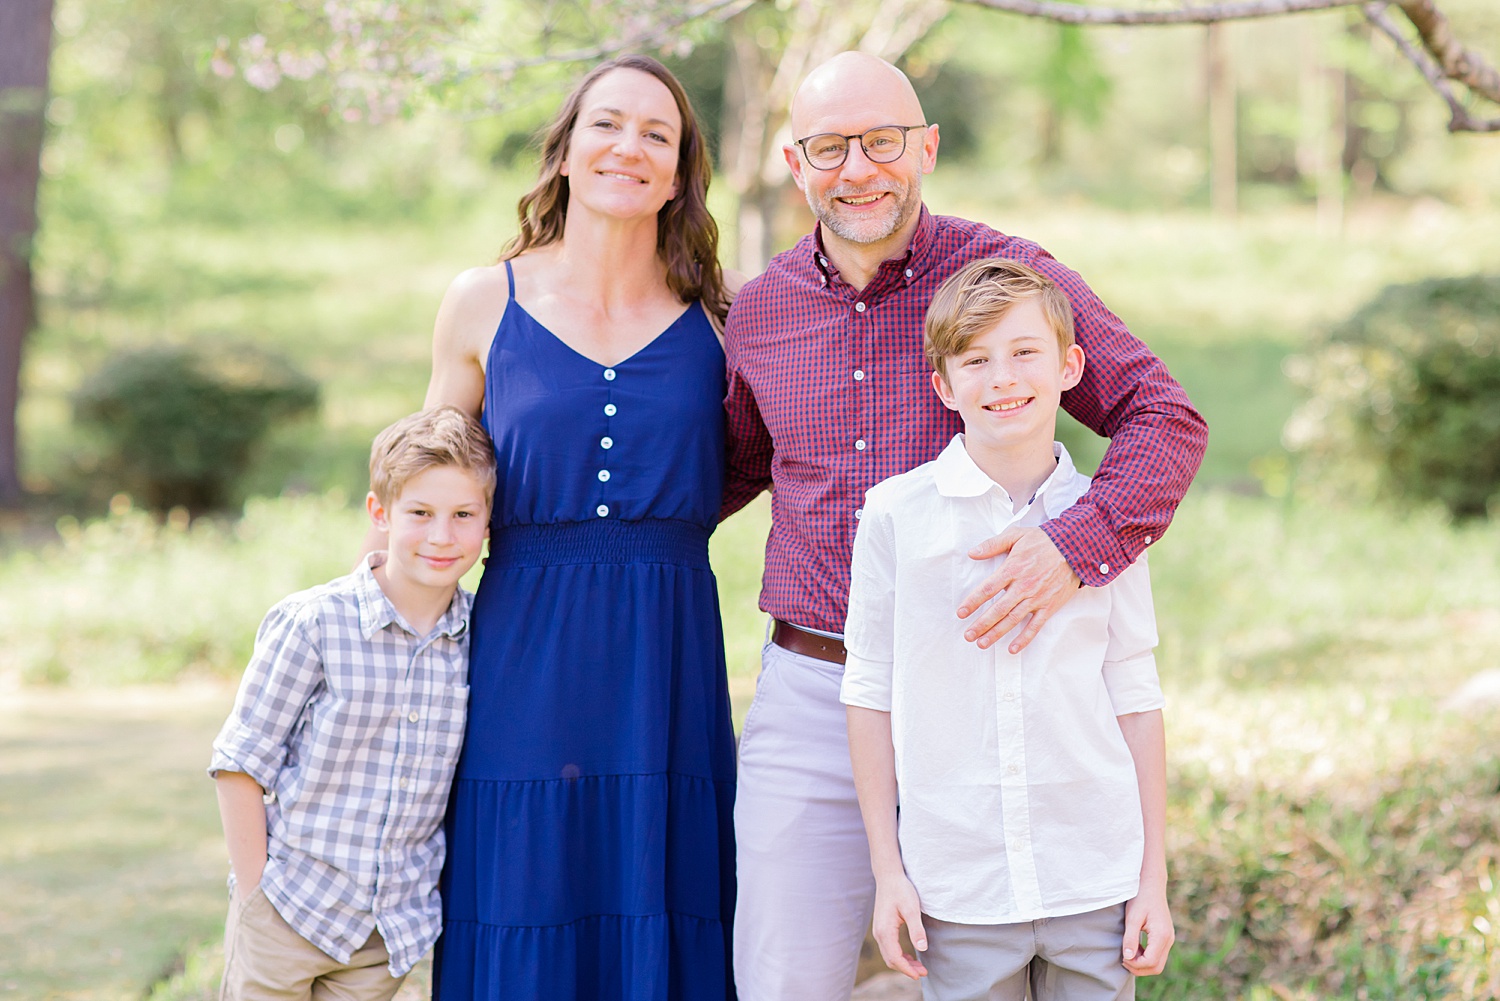 Birmingham AL Family photographer captures parents with their two sons